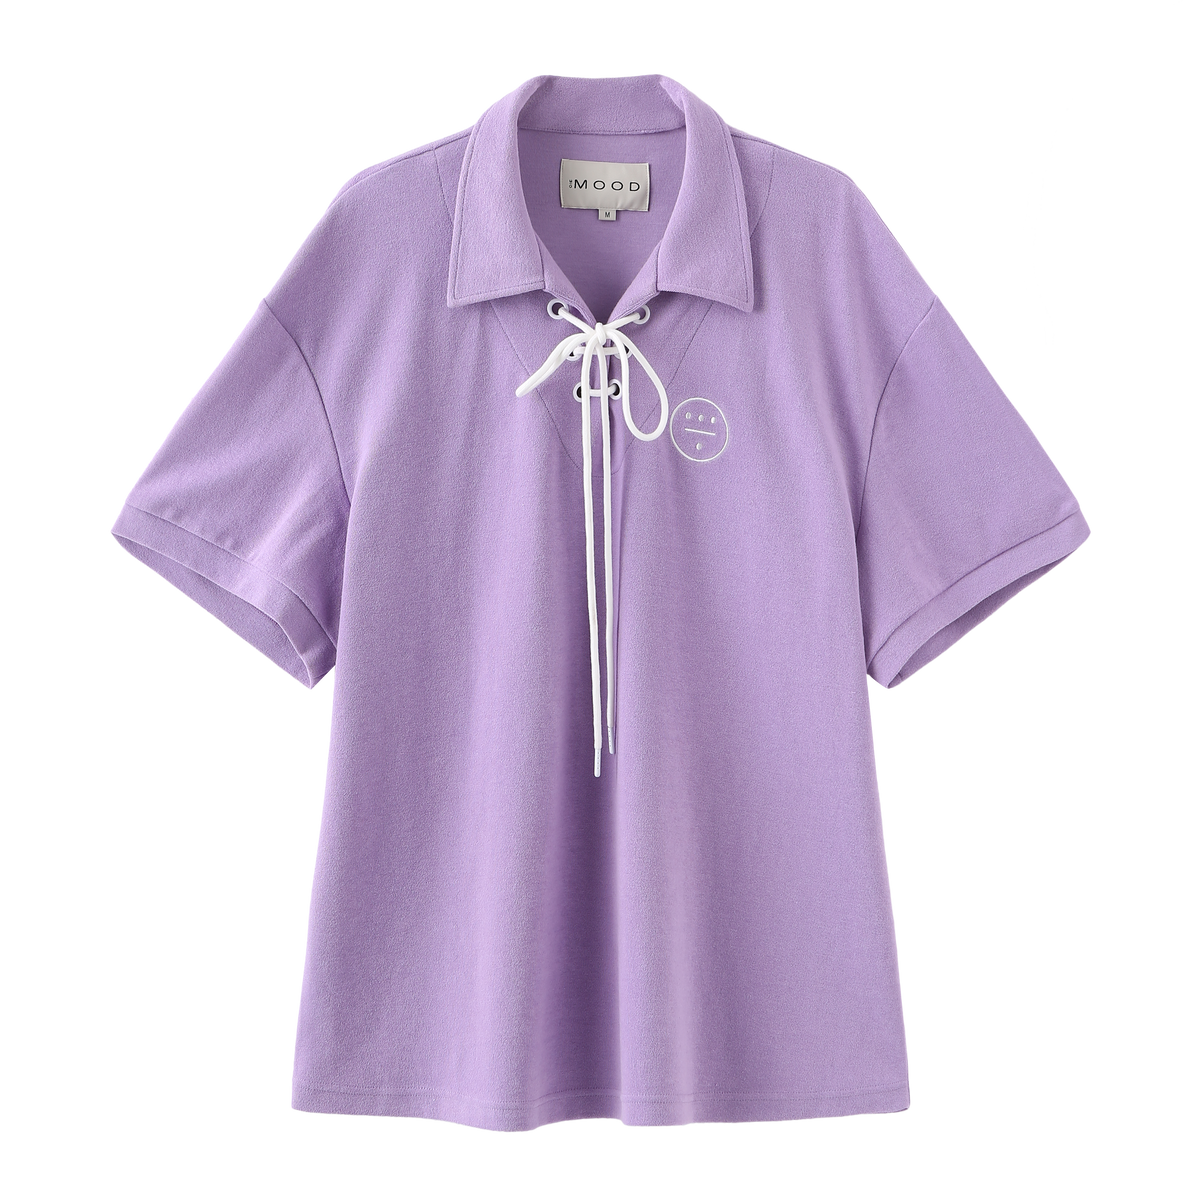 ICON Summer Teddy French Terry Top - Purple